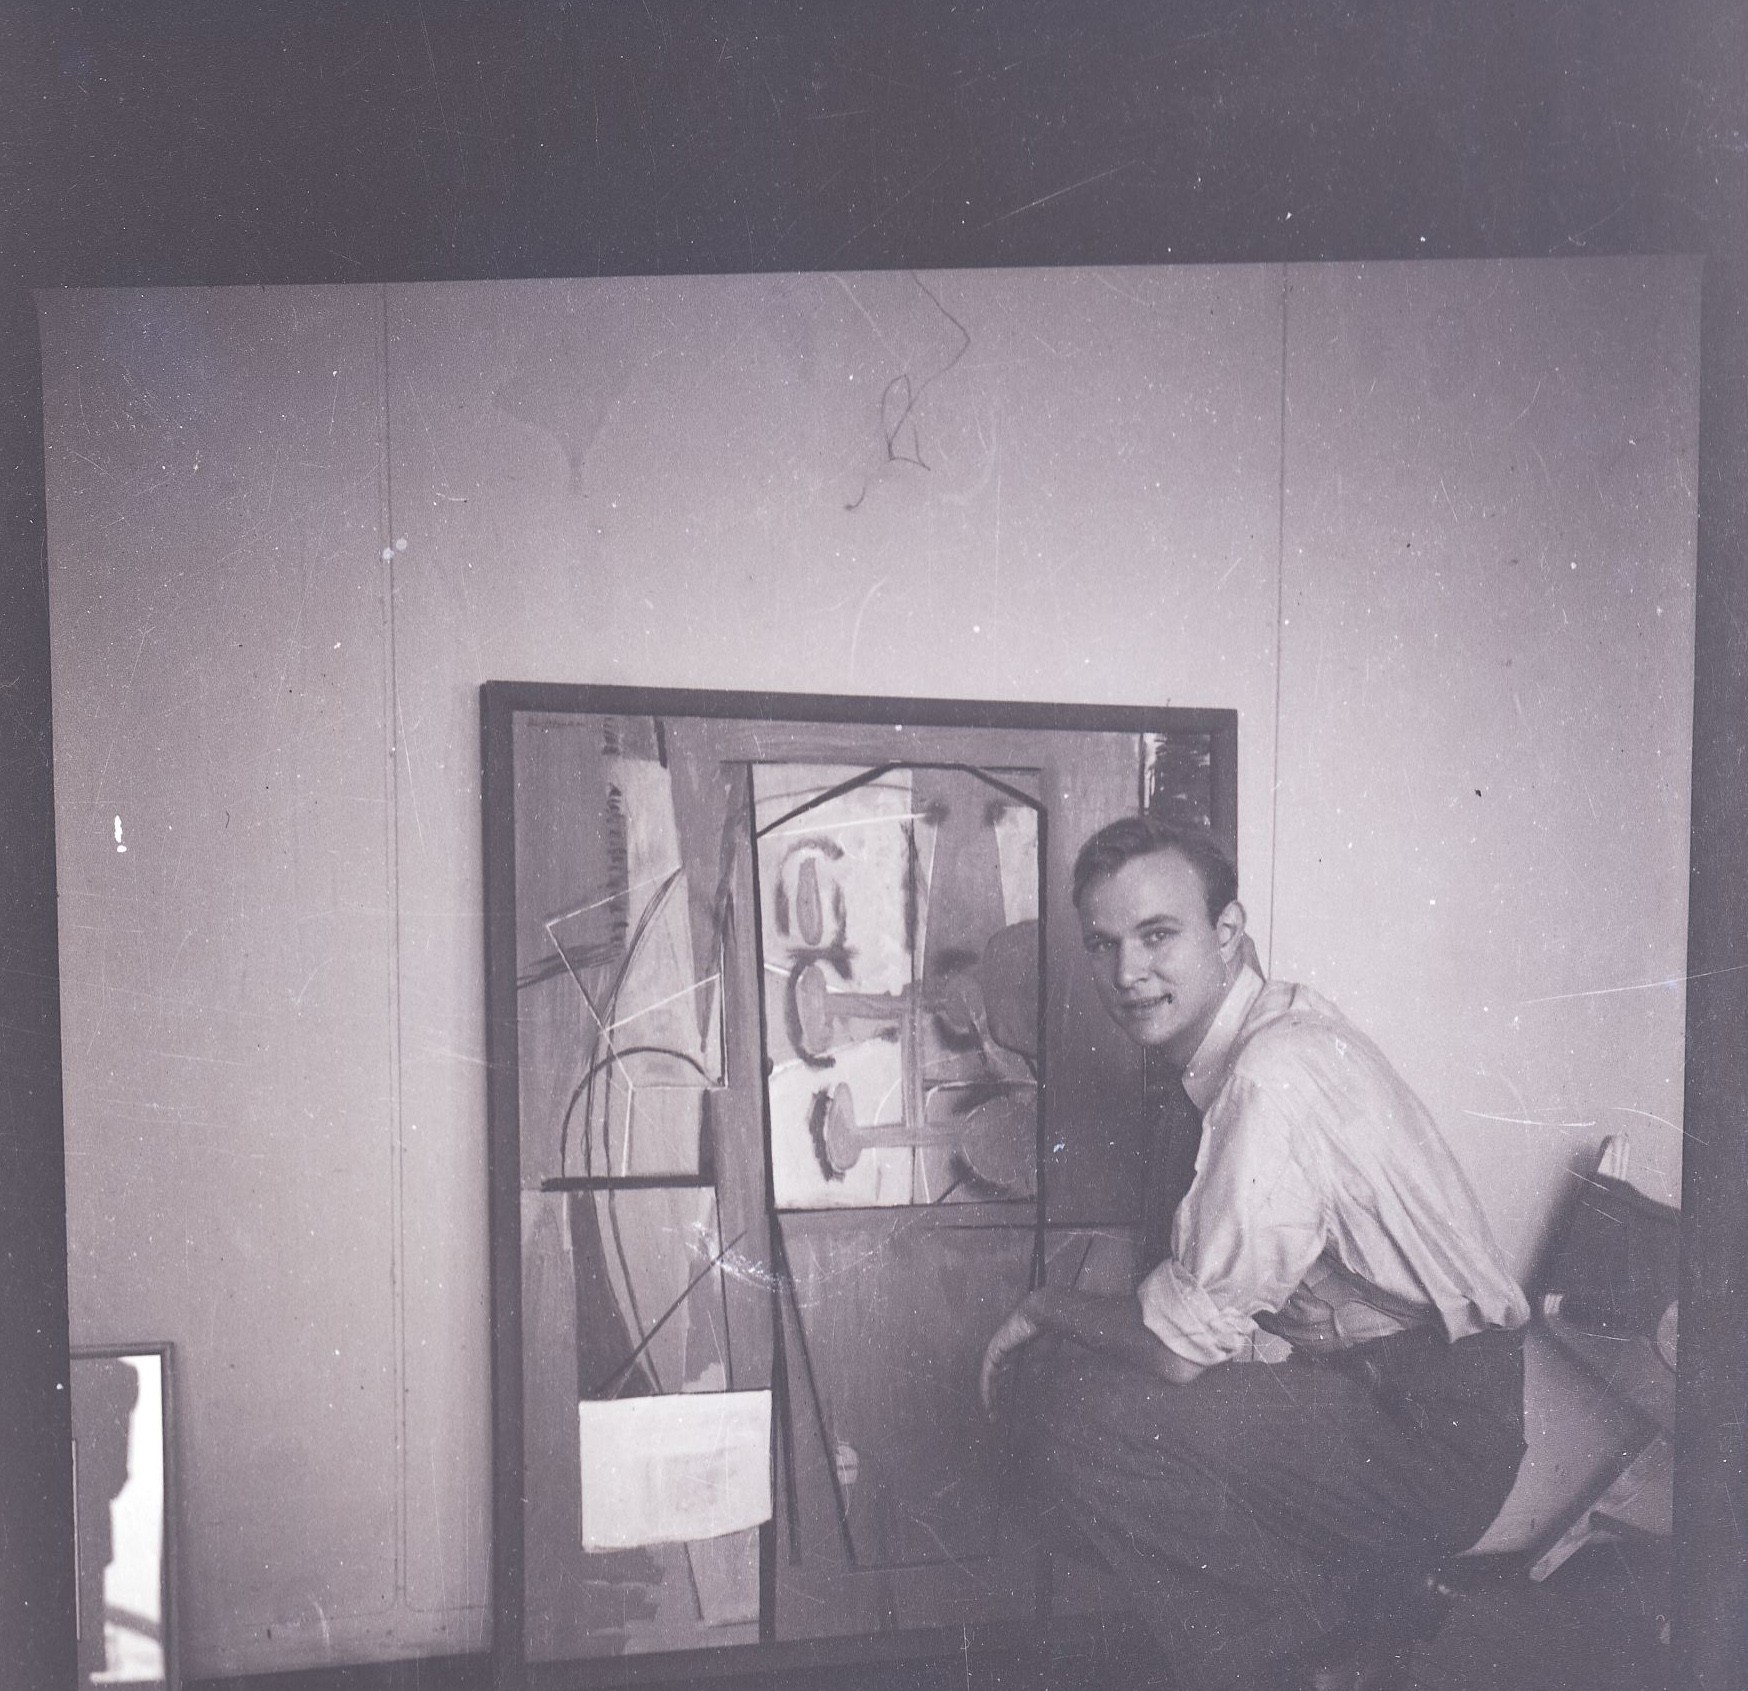 Motherwell installing his exhibition at Art of This Century, New York, October 1944